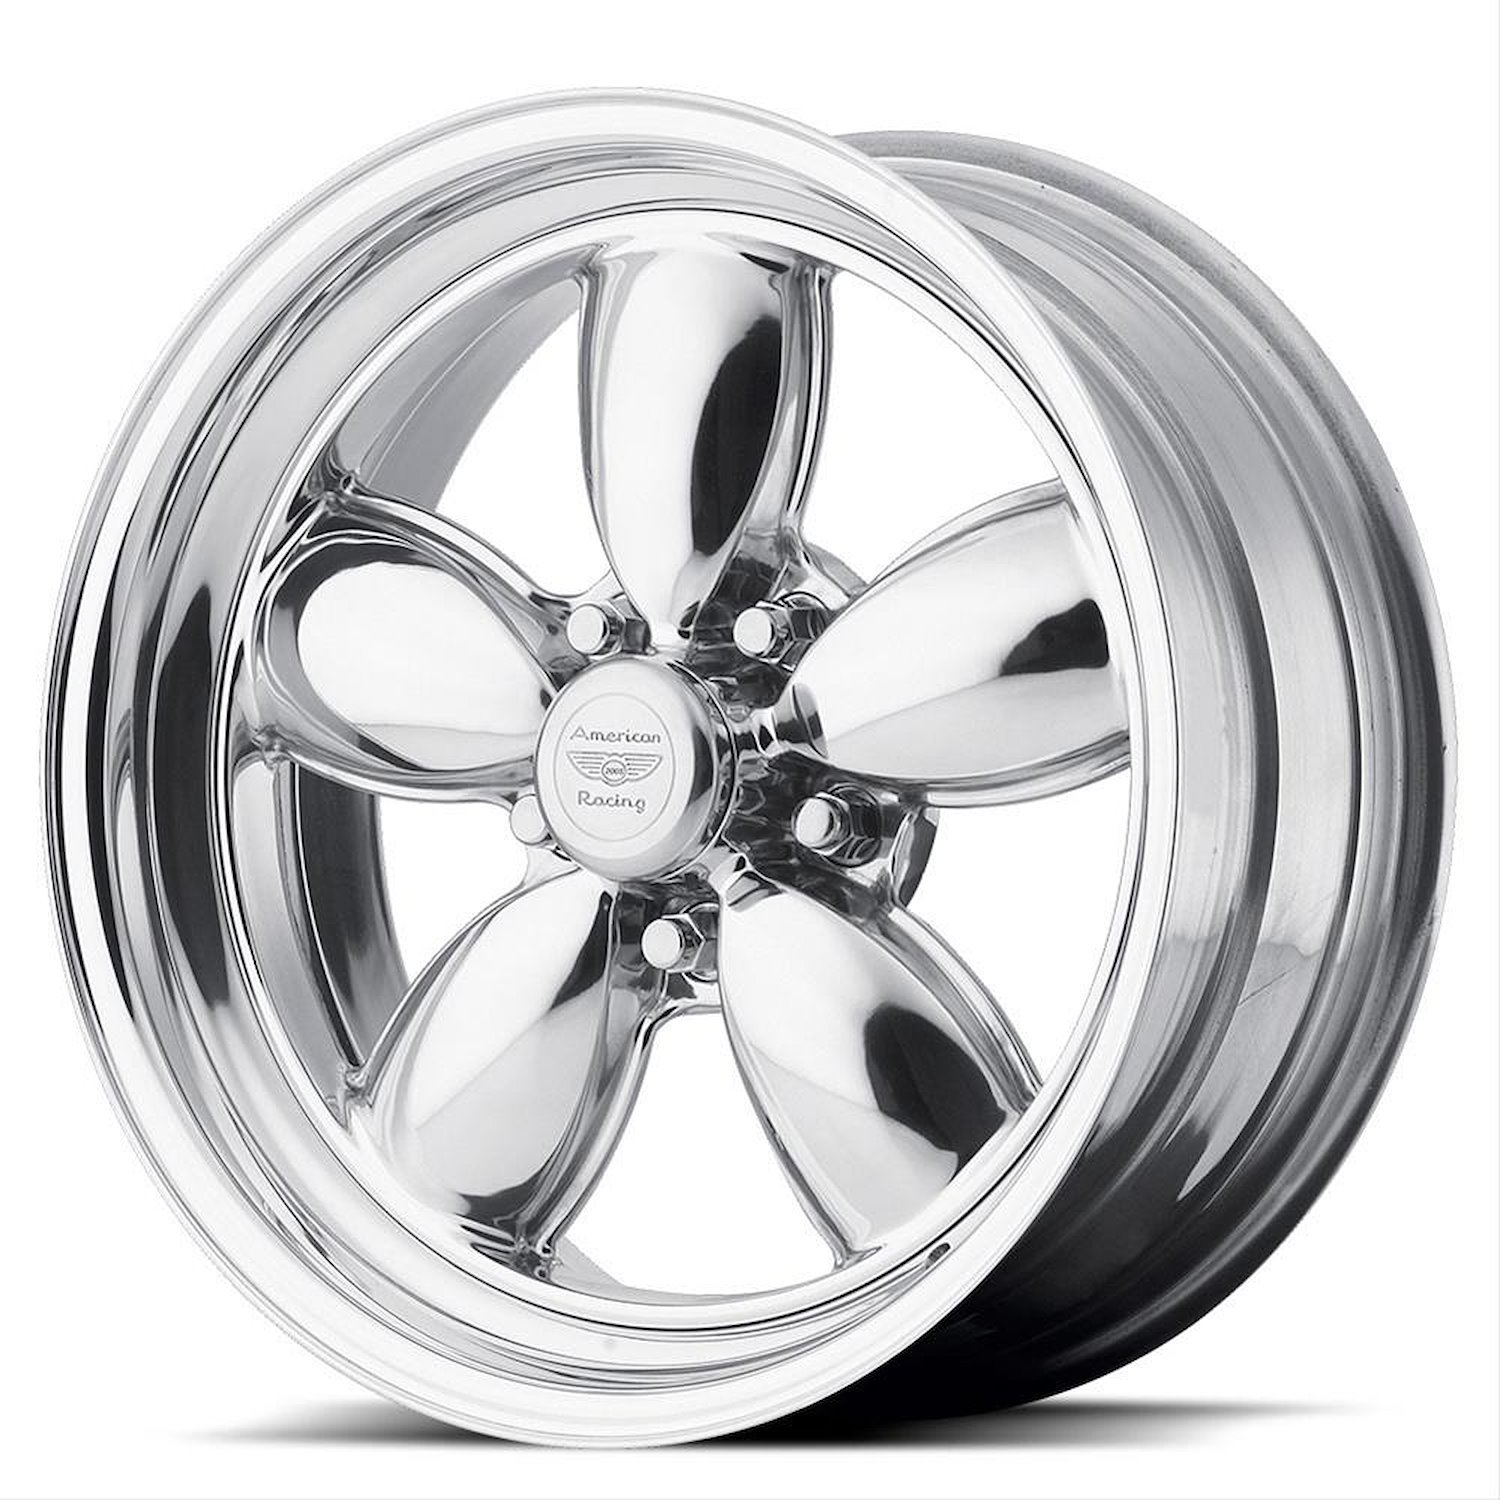 AMERICAN RACING CLASSIC 200S TWO-PIECE POLISHED 15 x 10 5x4.5 -64 2.98